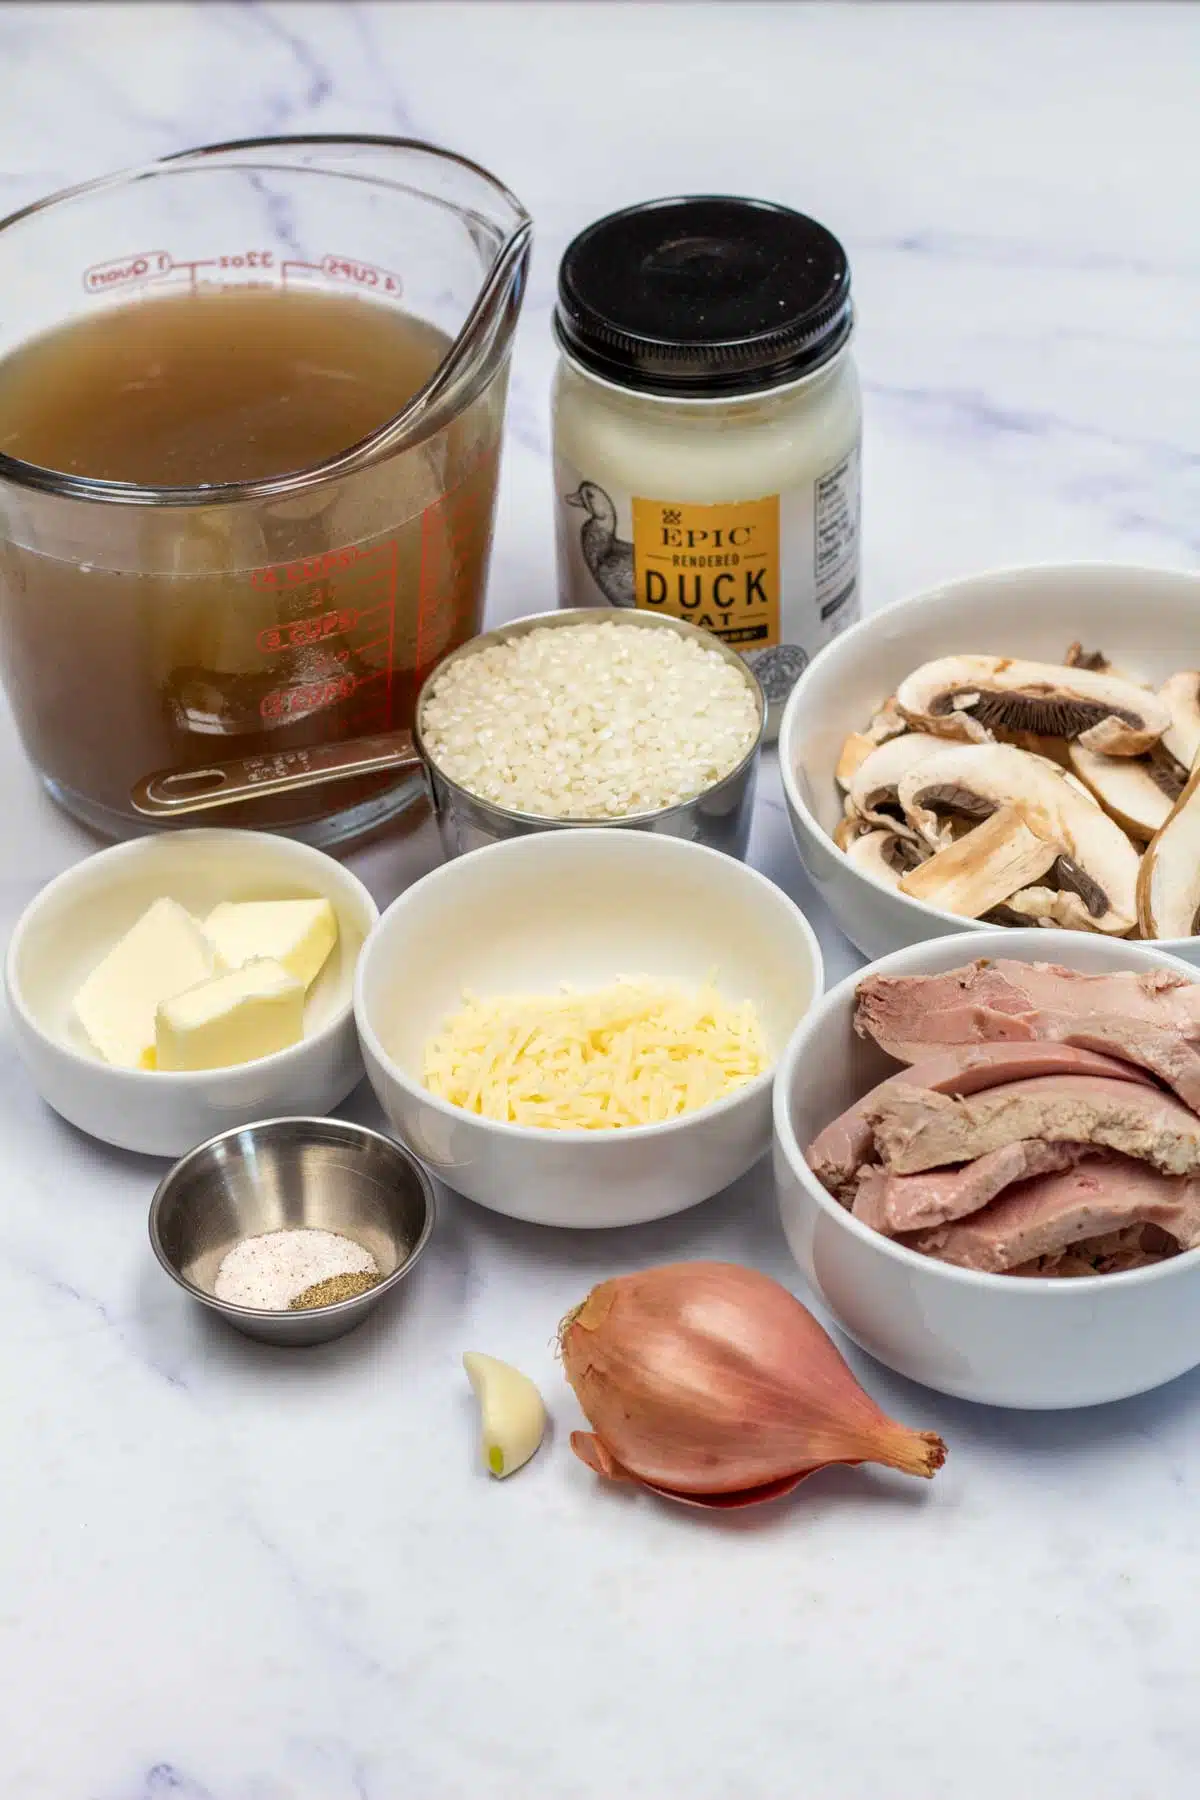 Tall image showing smoked duck risotto ingredients.